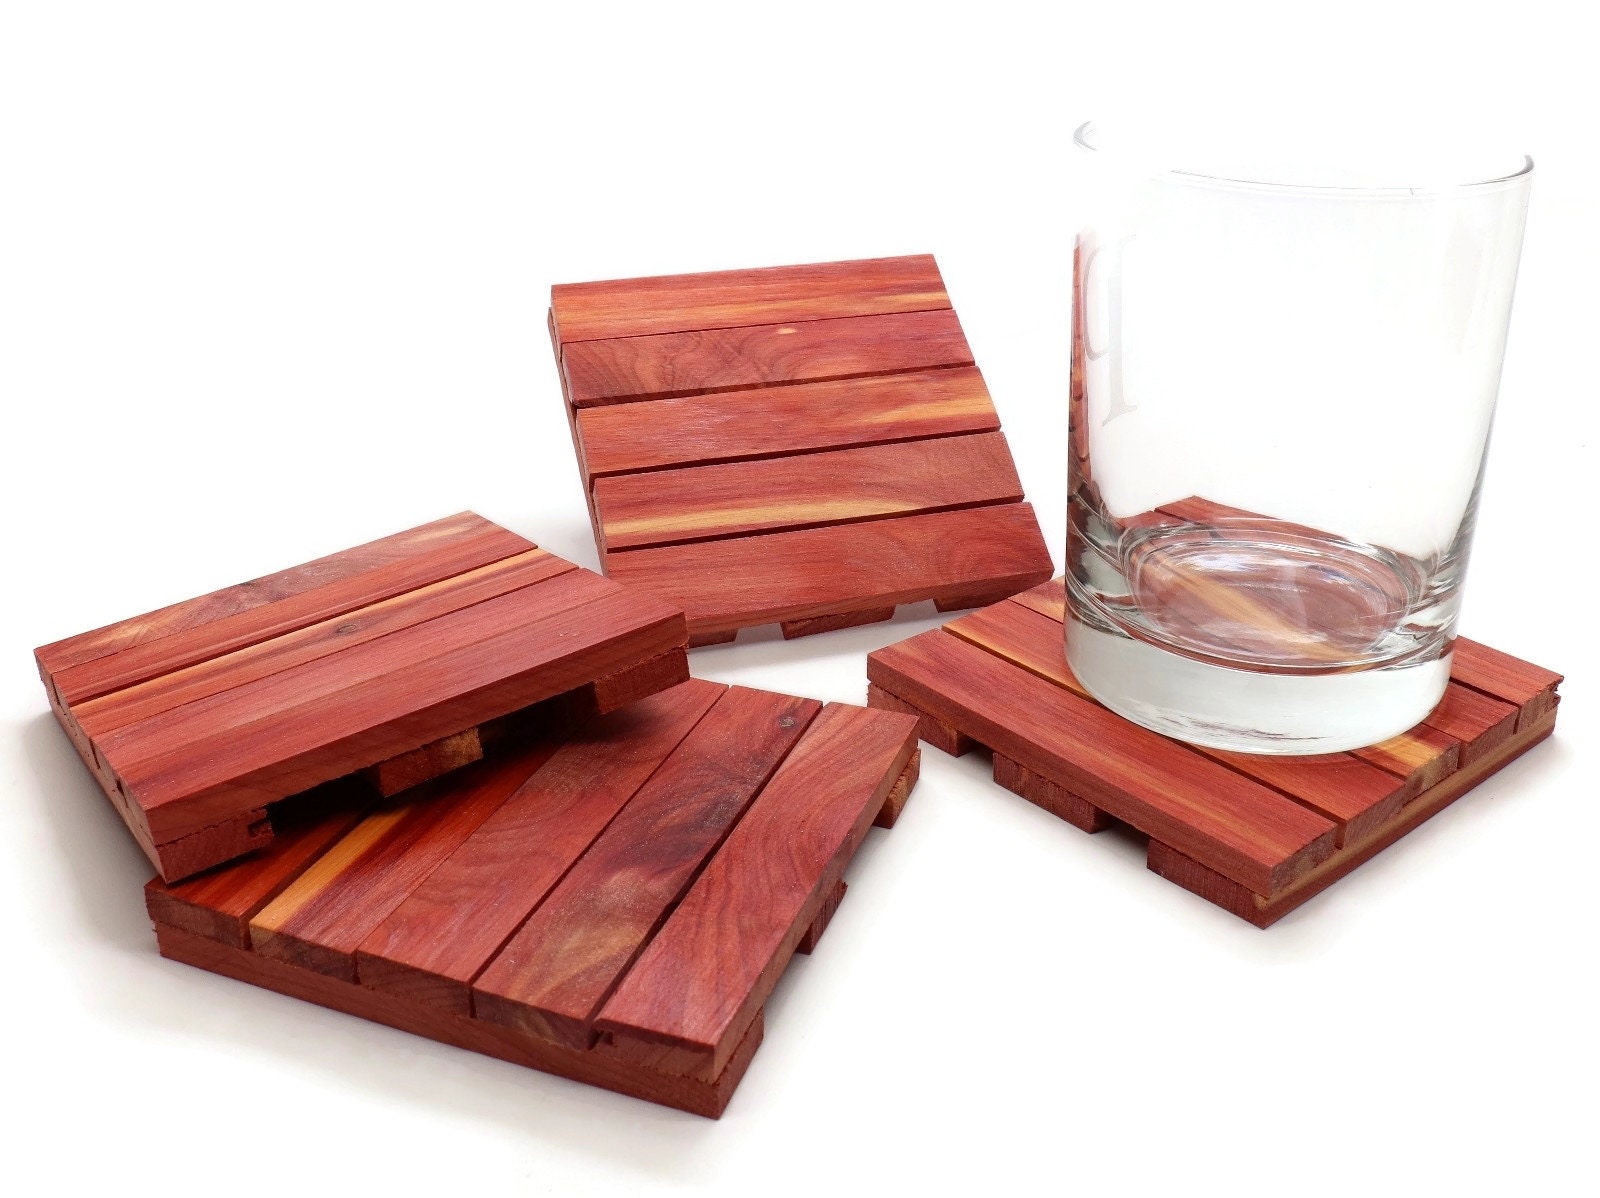 Round Wooden Coasters for Drinks tulip, Set of 4 Wood Coasters